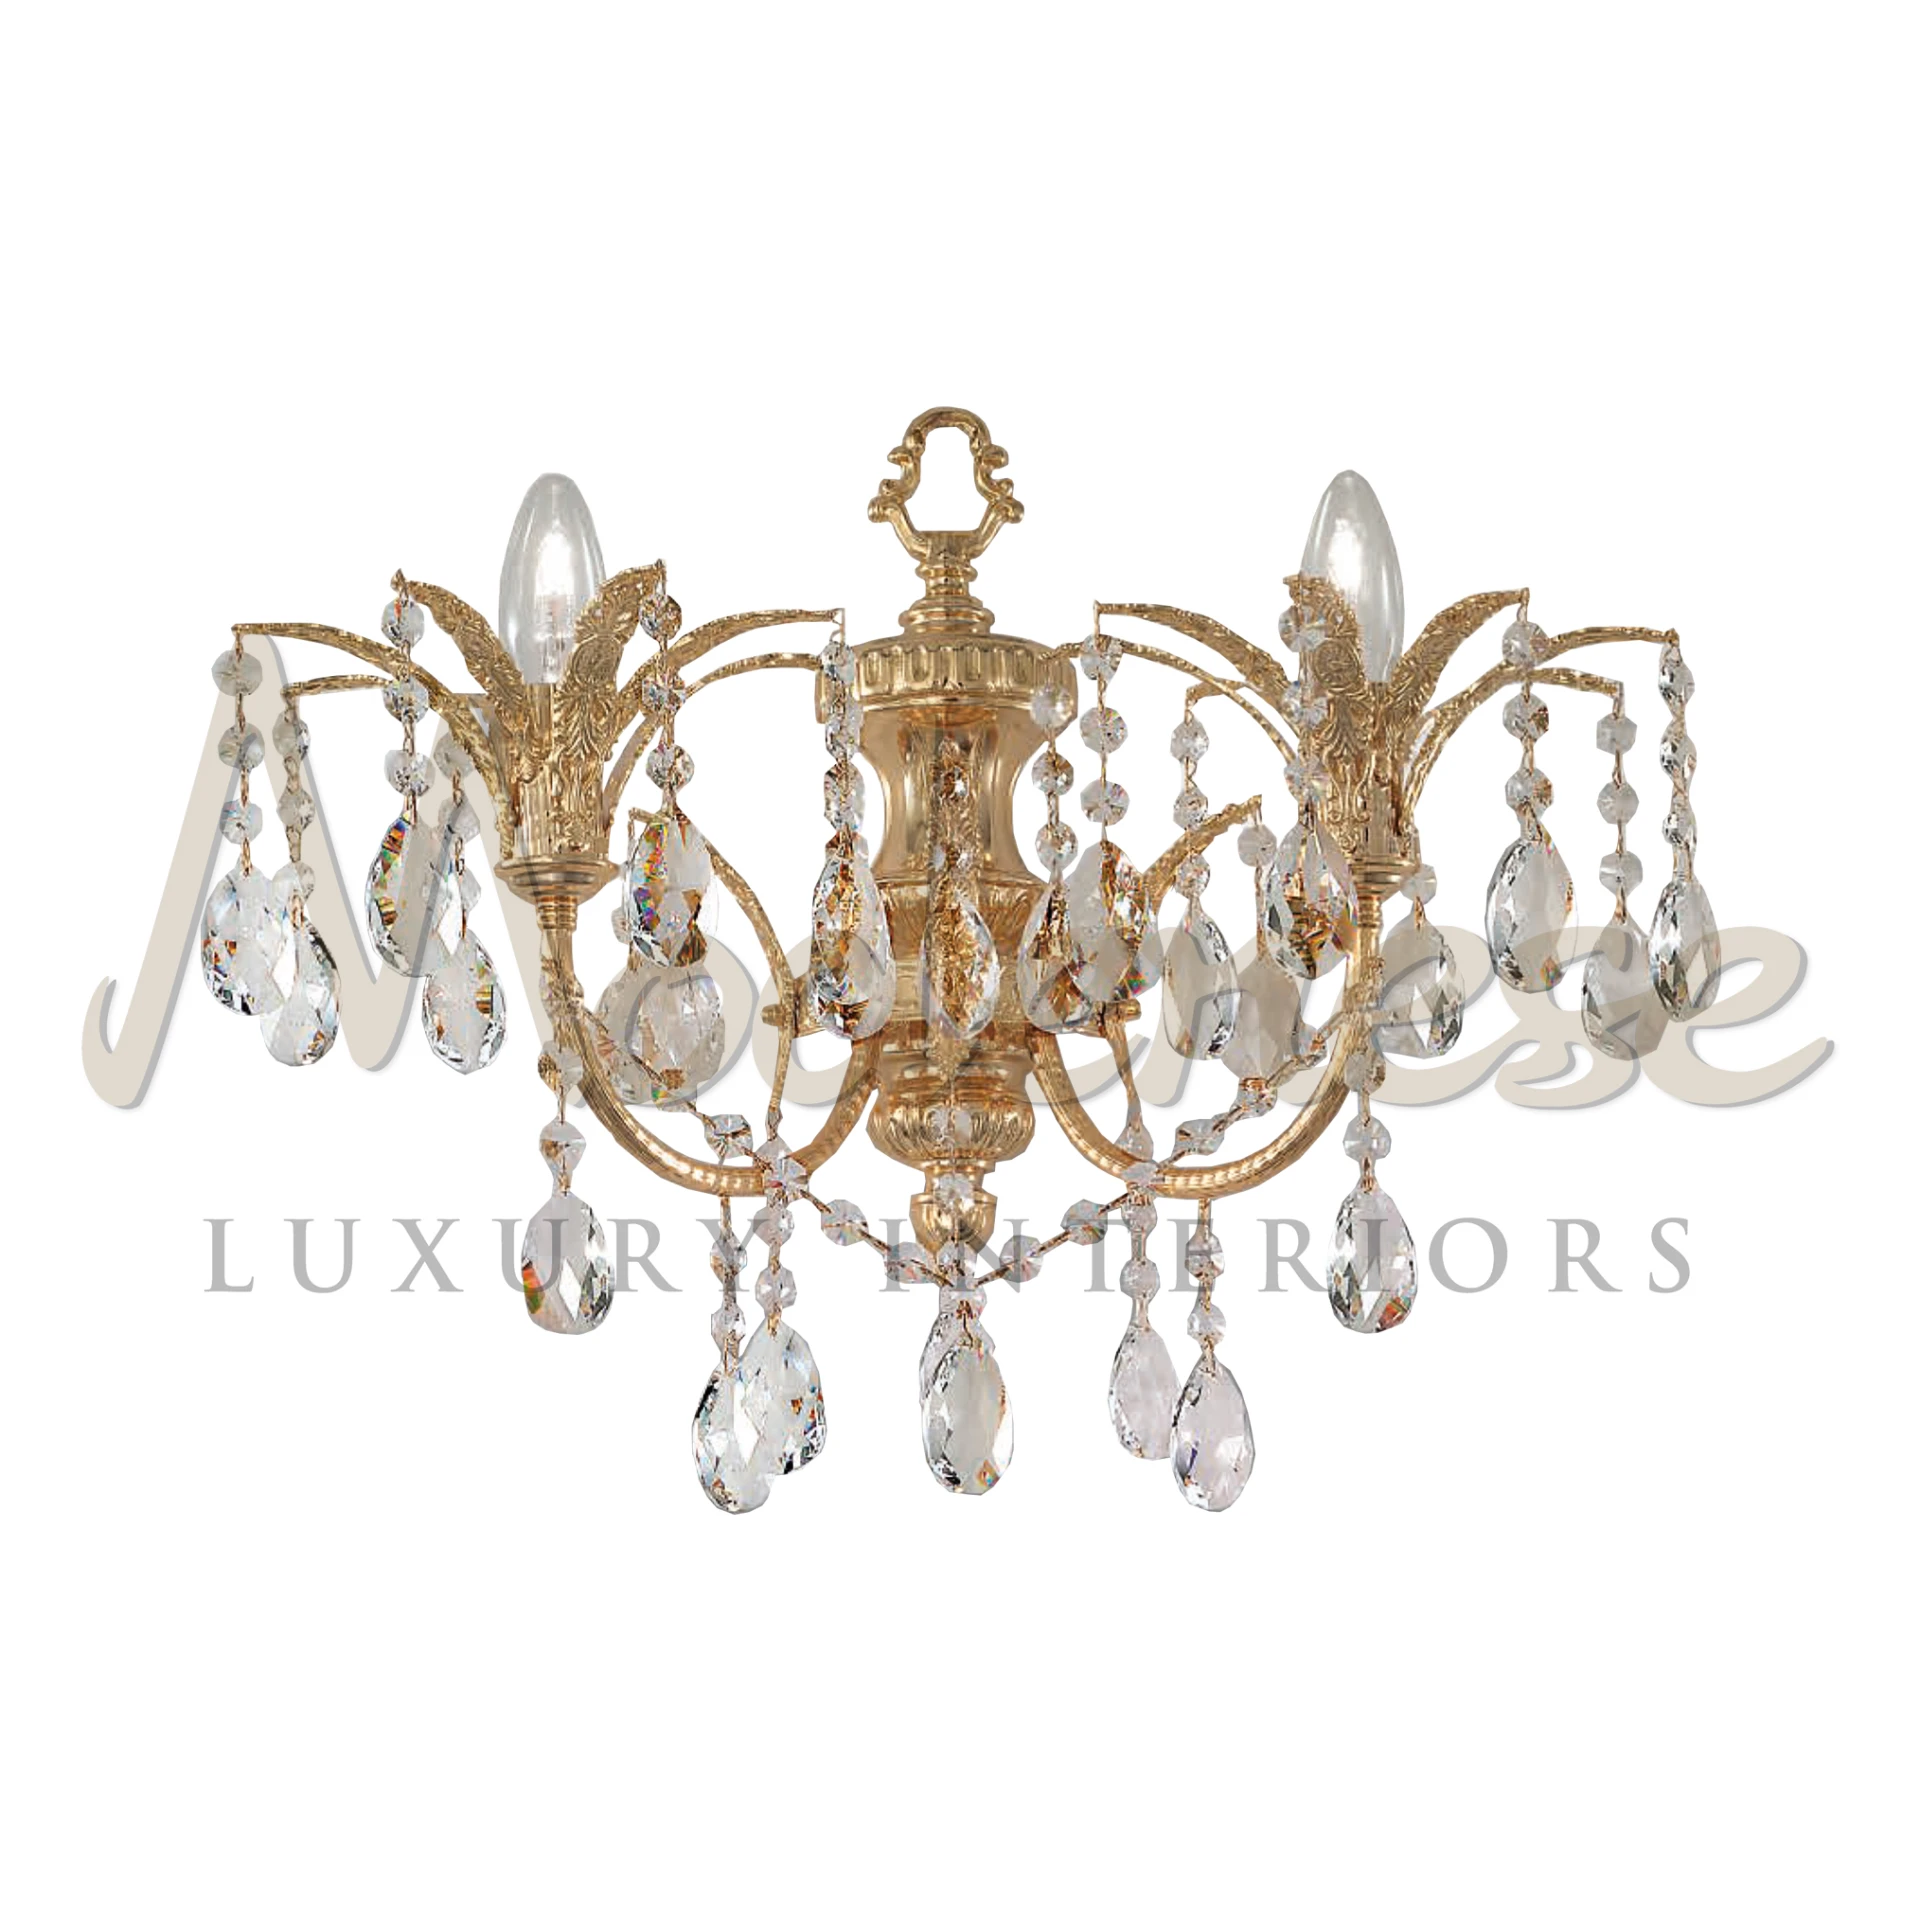 The 'Heritage Wall Fixture' from Modenese Luxury Lightings, featuring classic gold accents and sparkling crystals.